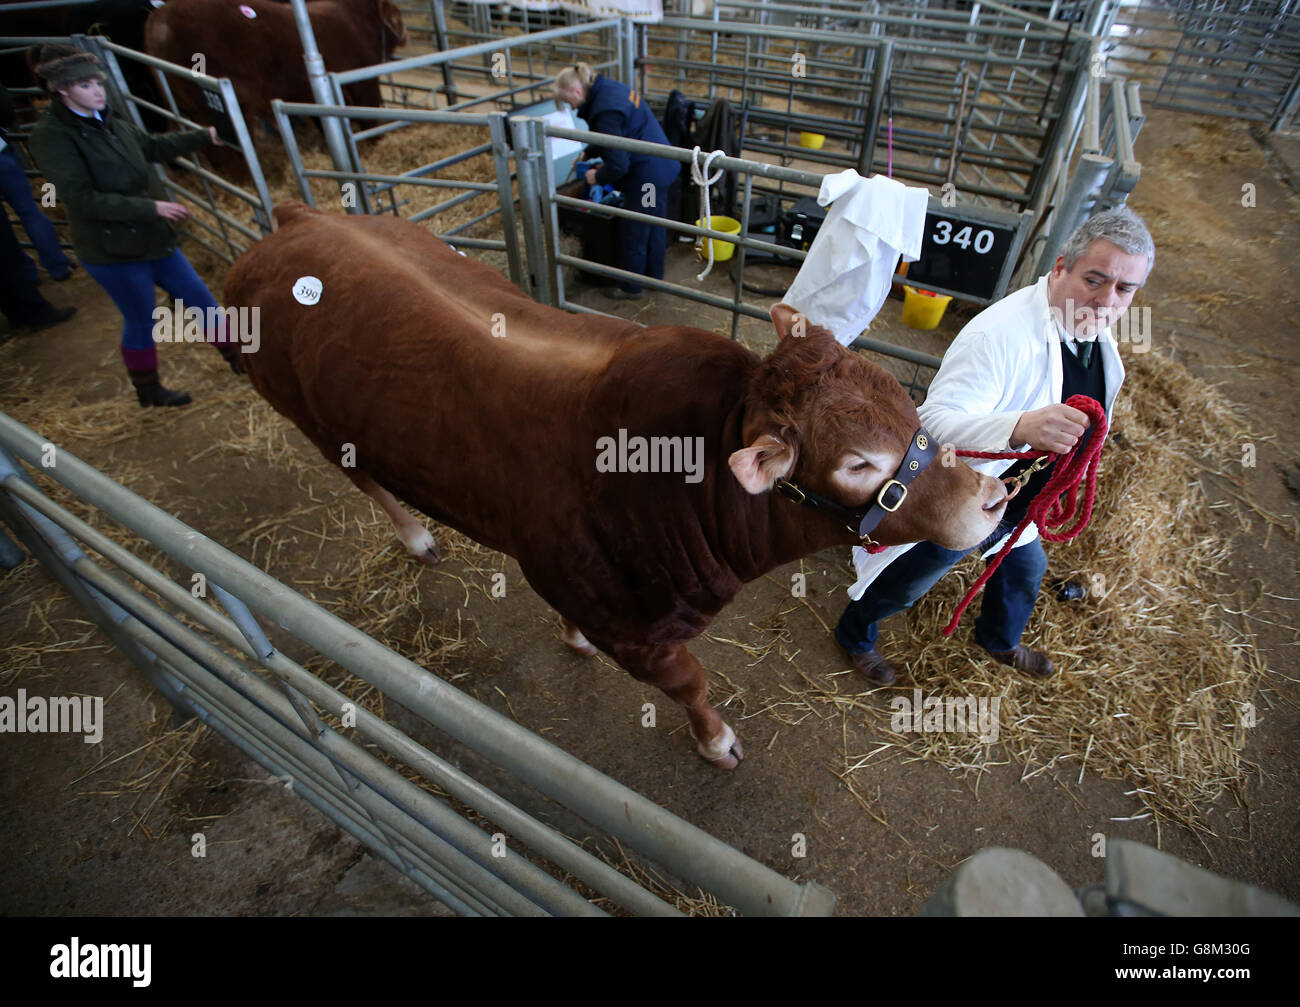 A Limousin Bull is moved from its pen during the third and final day of the Stirling Bull Sale at United Auctions in Stirling, Scotland. Stock Photo